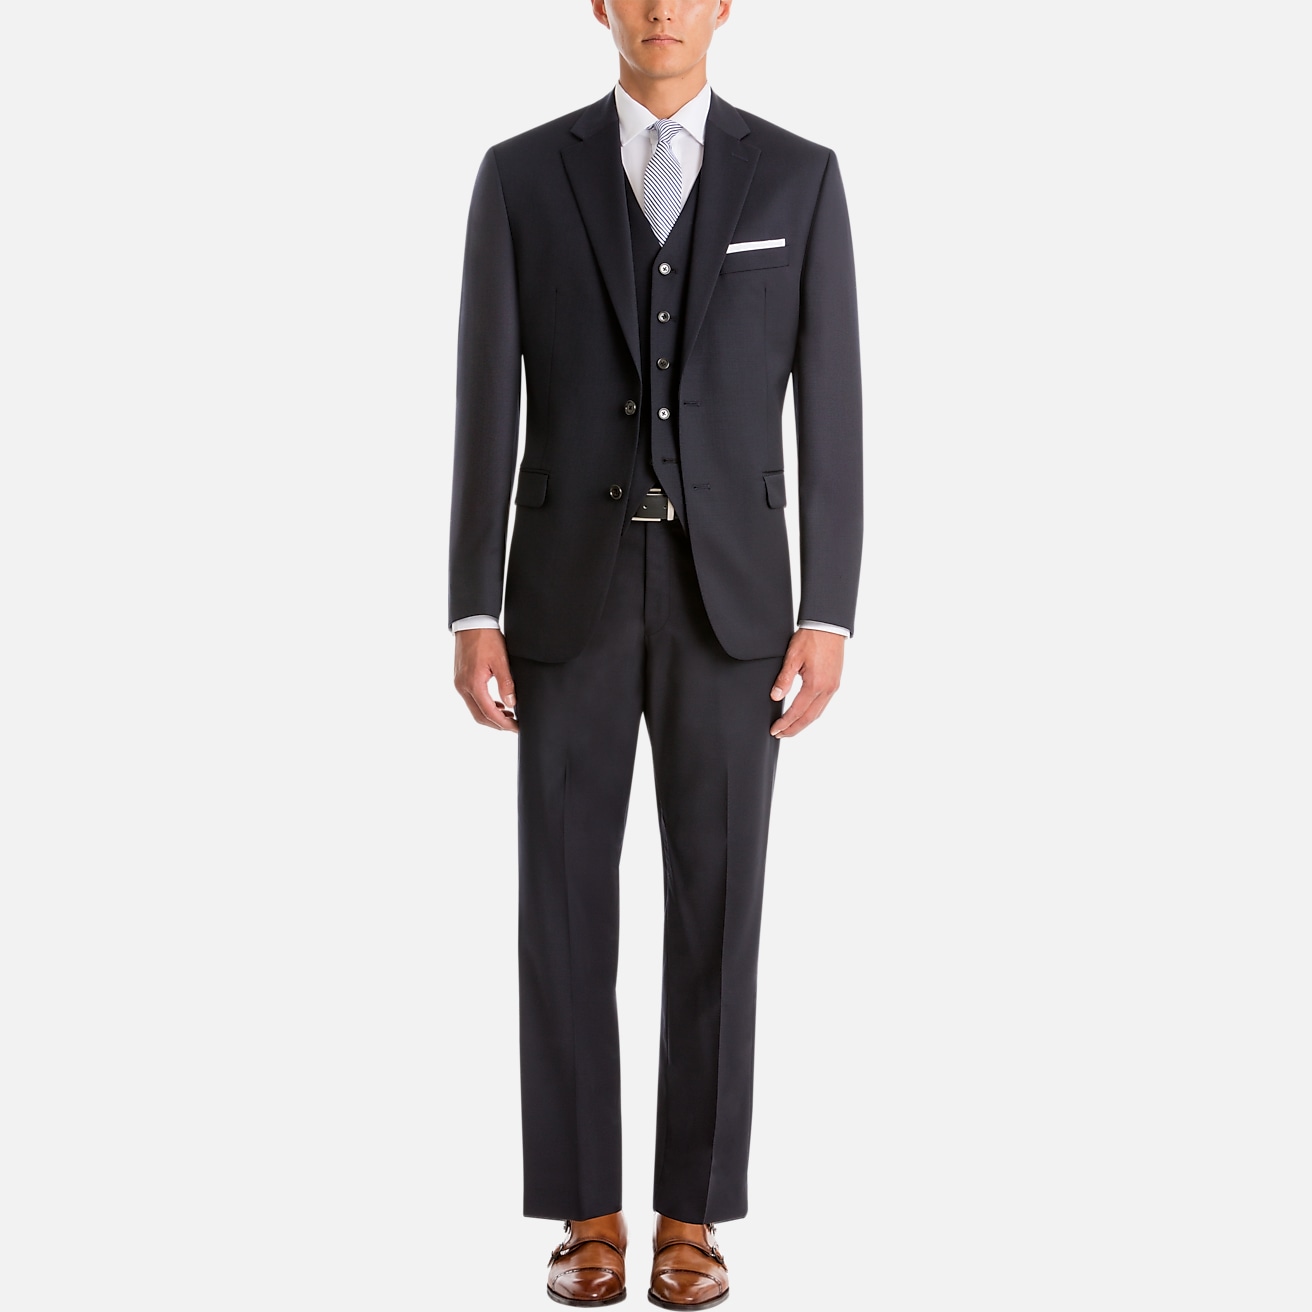 https://image.menswearhouse.com/is/image/TMW/TMW_3VDK_01_LAUREN_BY_RALPH_LAUREN_SUIT_SEPARATE_PANTS_NAVY_TWILL_MAIN?imPolicy=pdp-mob-2x